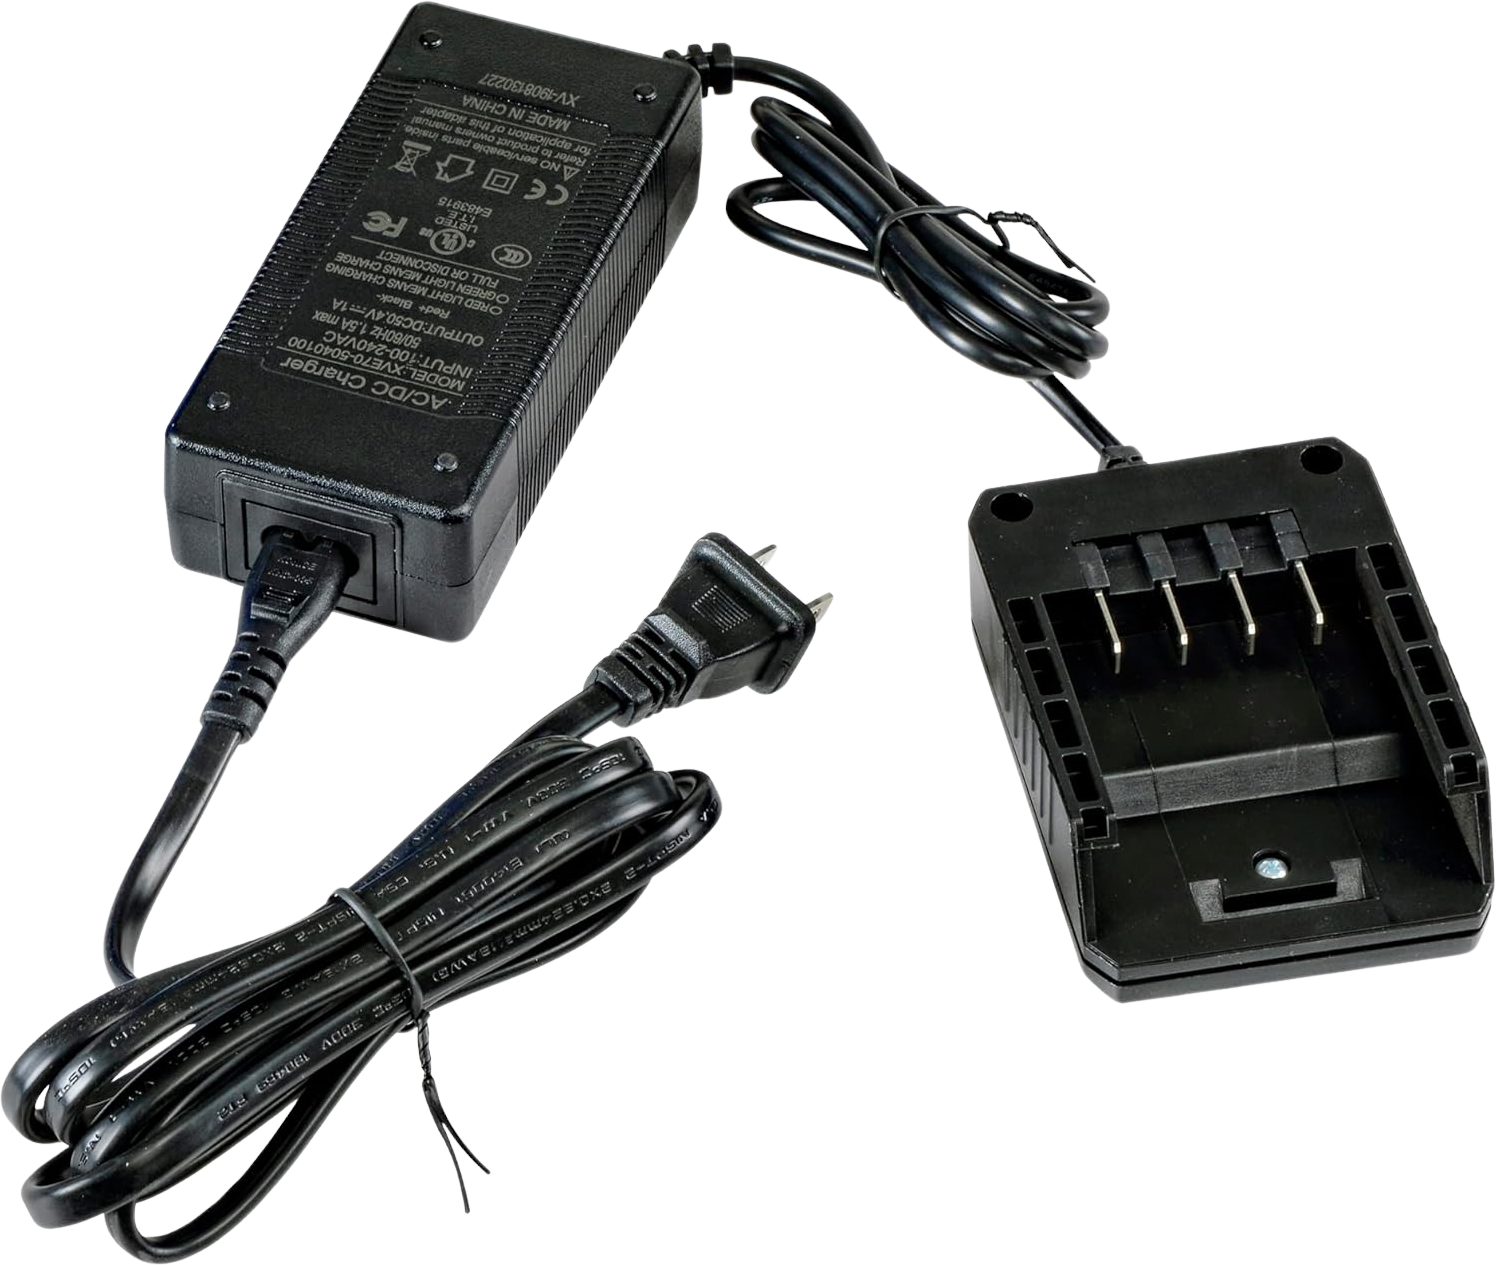 Super Handy GUT134 Heavy Duty Battery Charger For 48V 2Ah or 4Ah Lithium Ion Batteries New